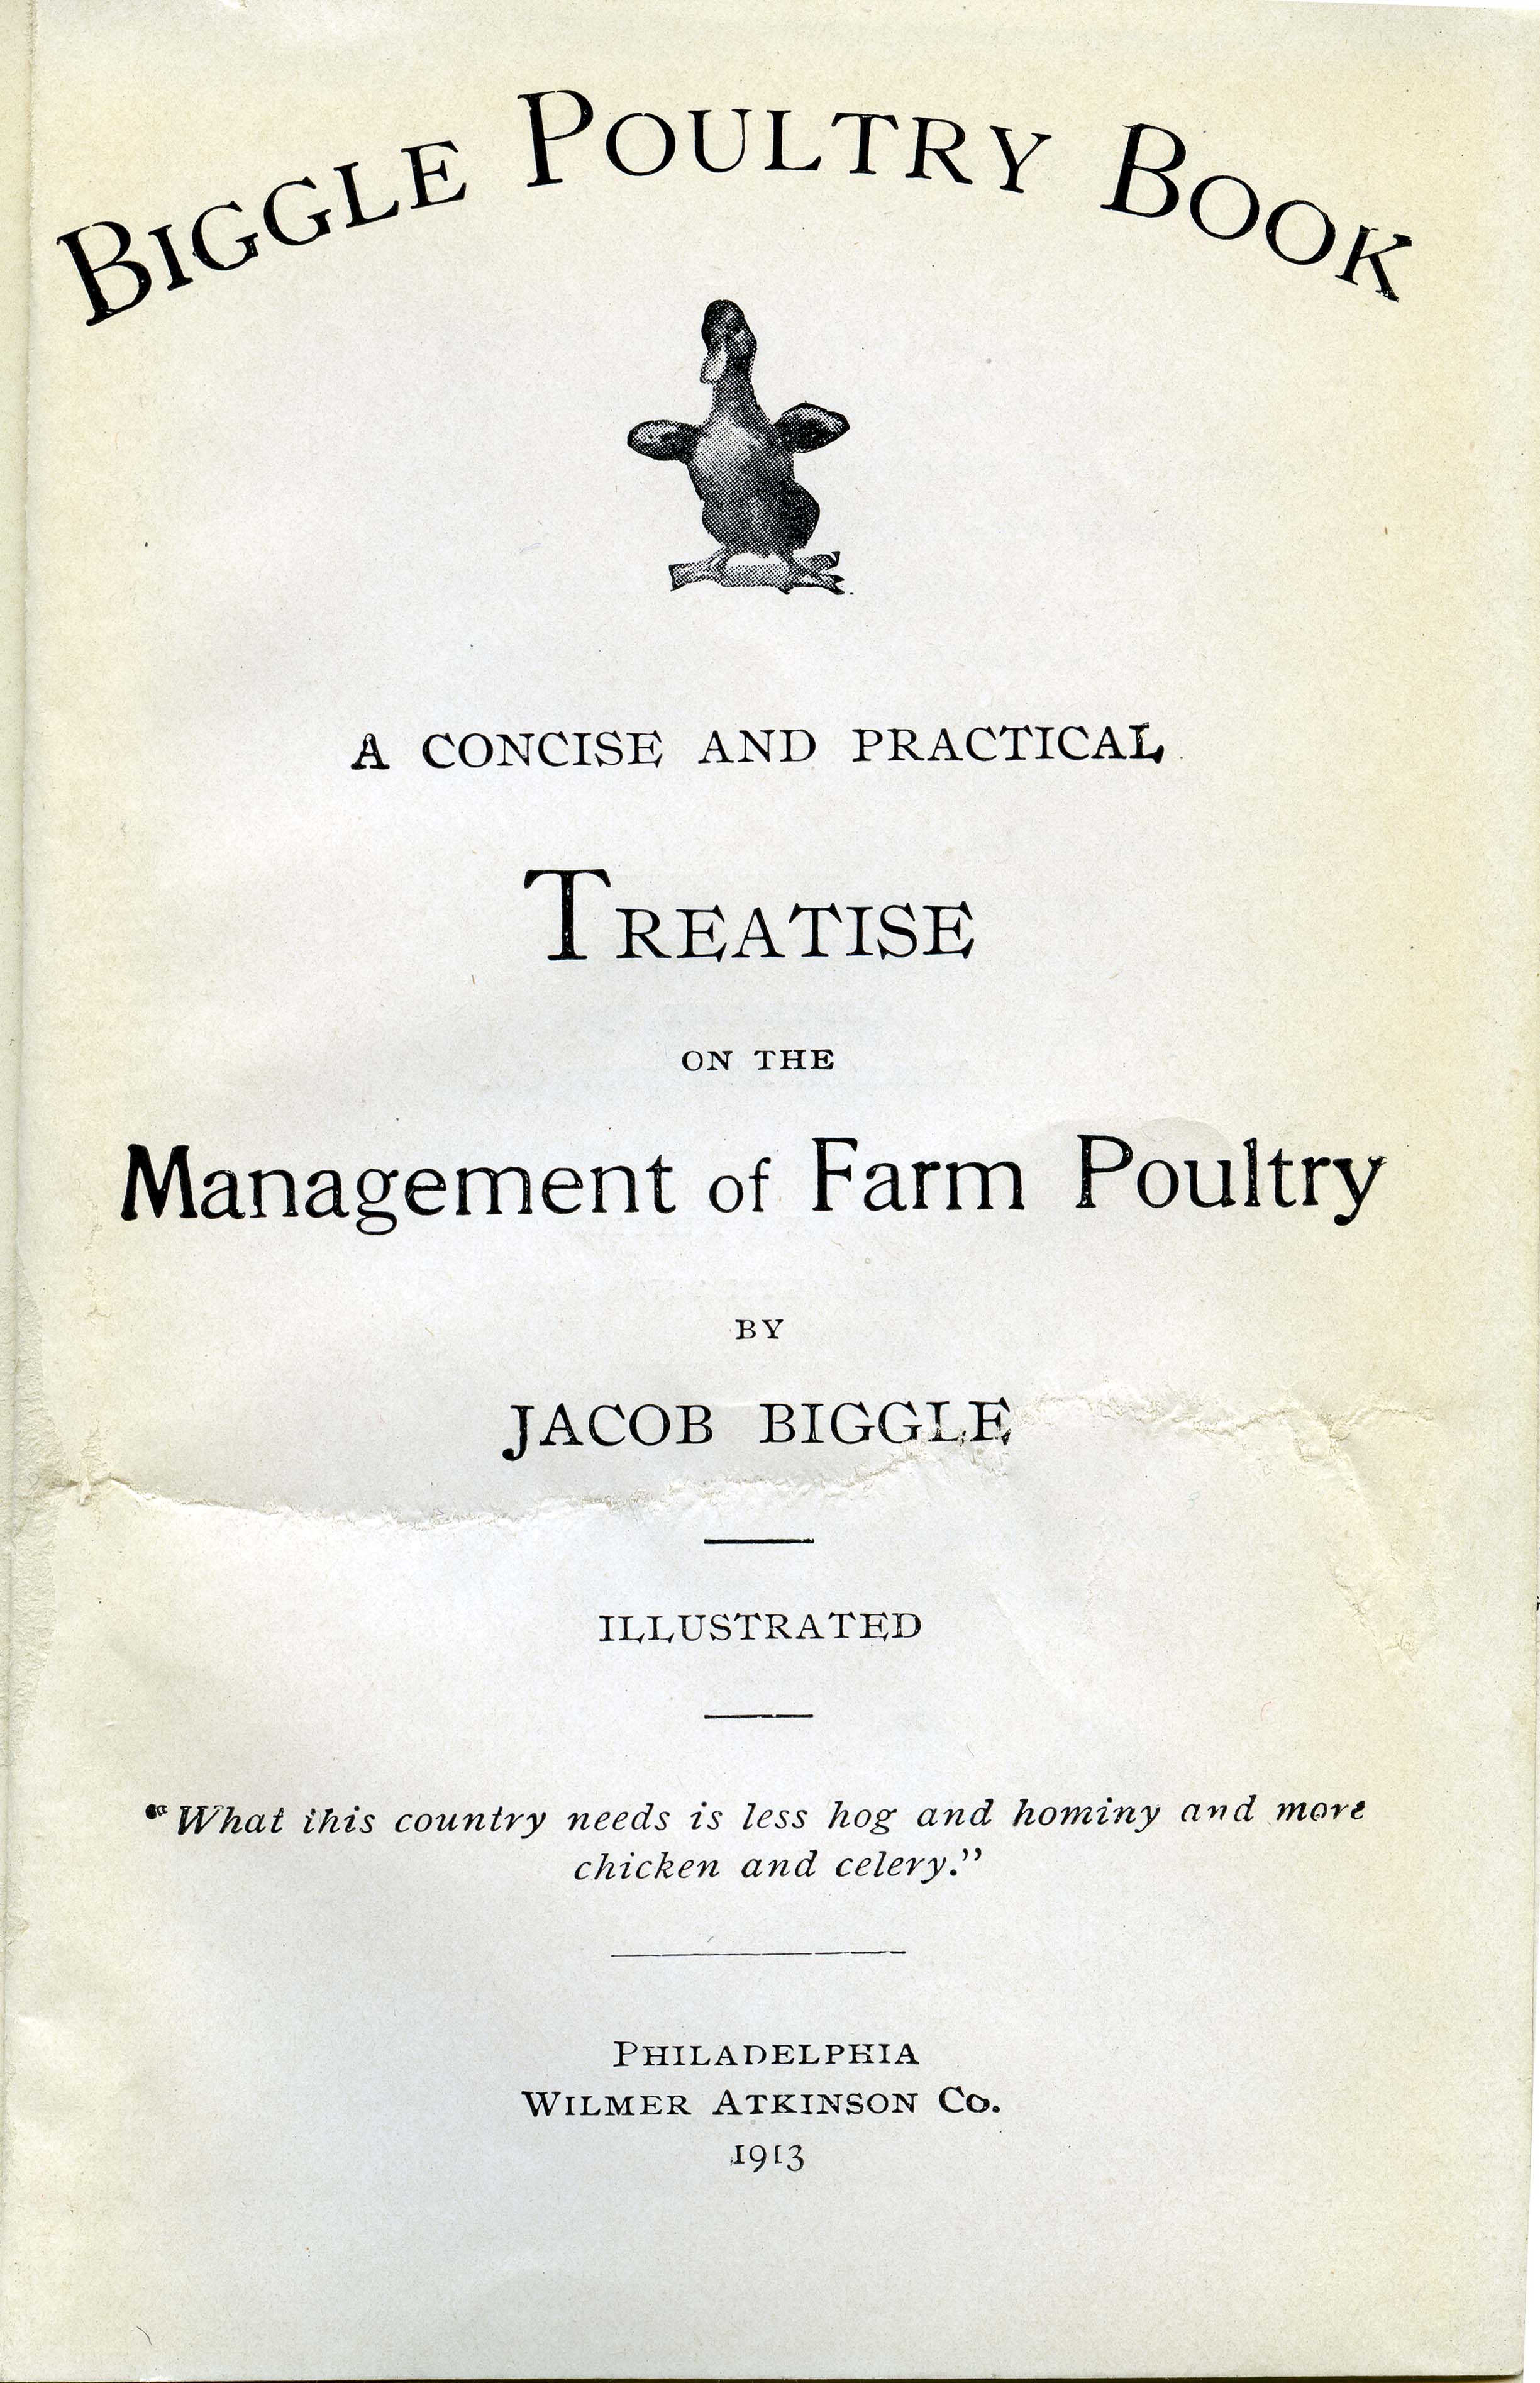 Biggle Poultry Book title page